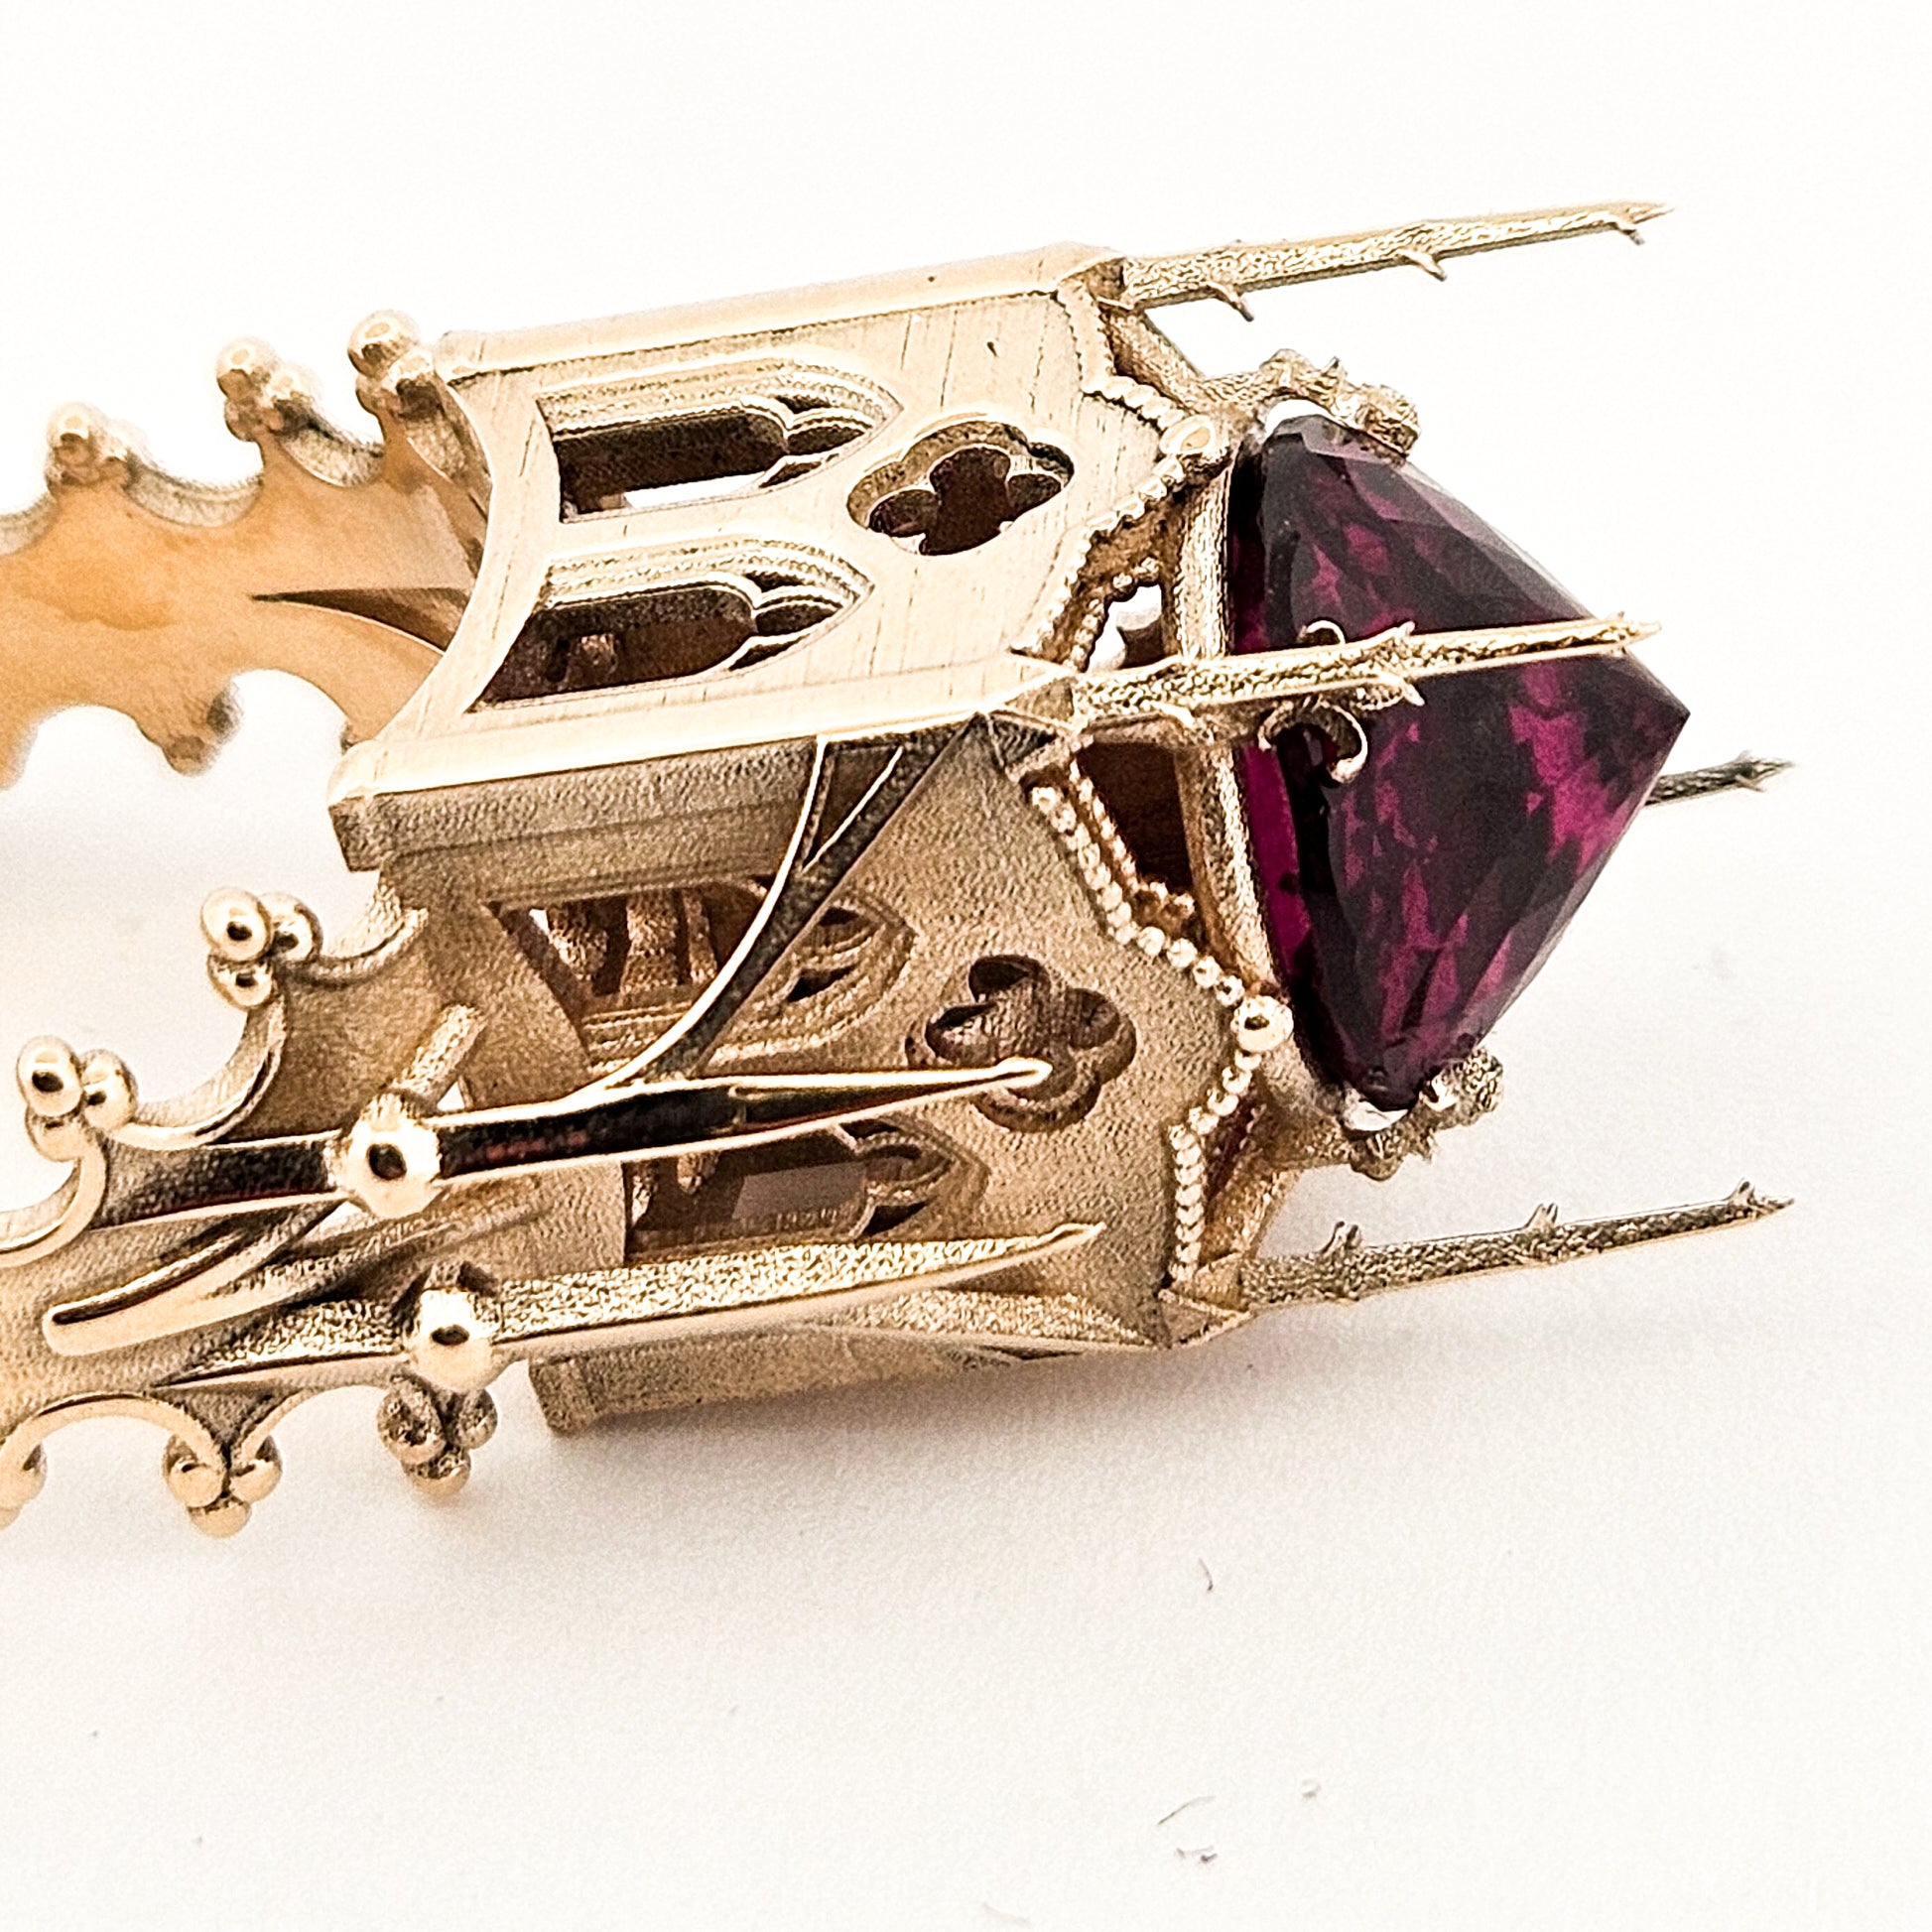 The Temple of Temptations - 14K Yellow Gold, Raspberry Garnet, Pink Spinelle and Ruby Ring